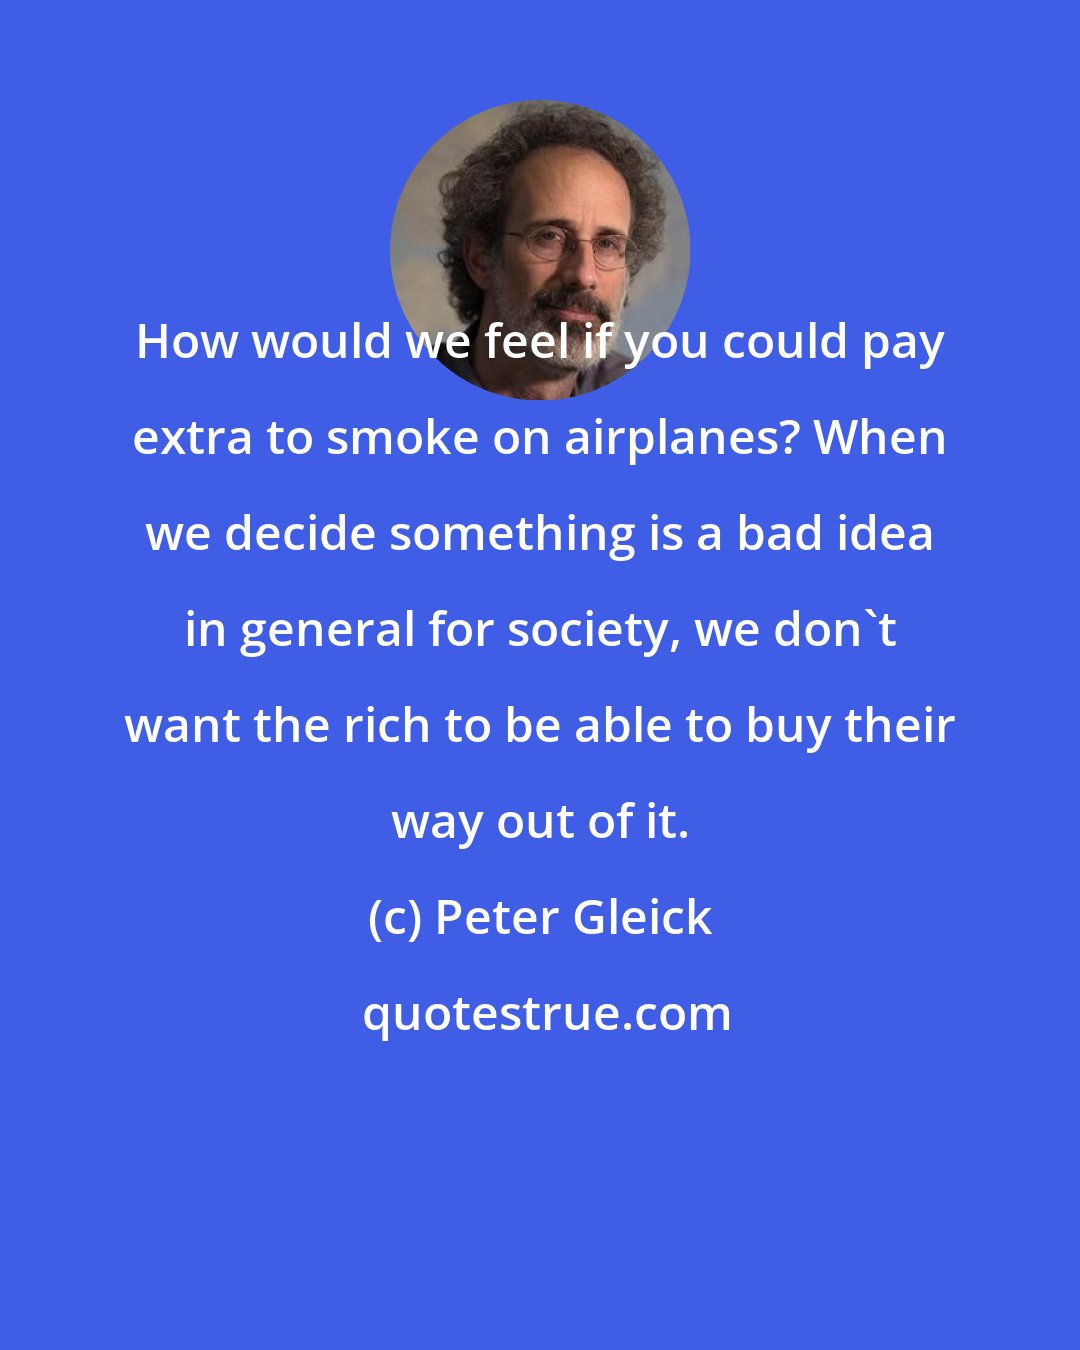 Peter Gleick: How would we feel if you could pay extra to smoke on airplanes? When we decide something is a bad idea in general for society, we don't want the rich to be able to buy their way out of it.